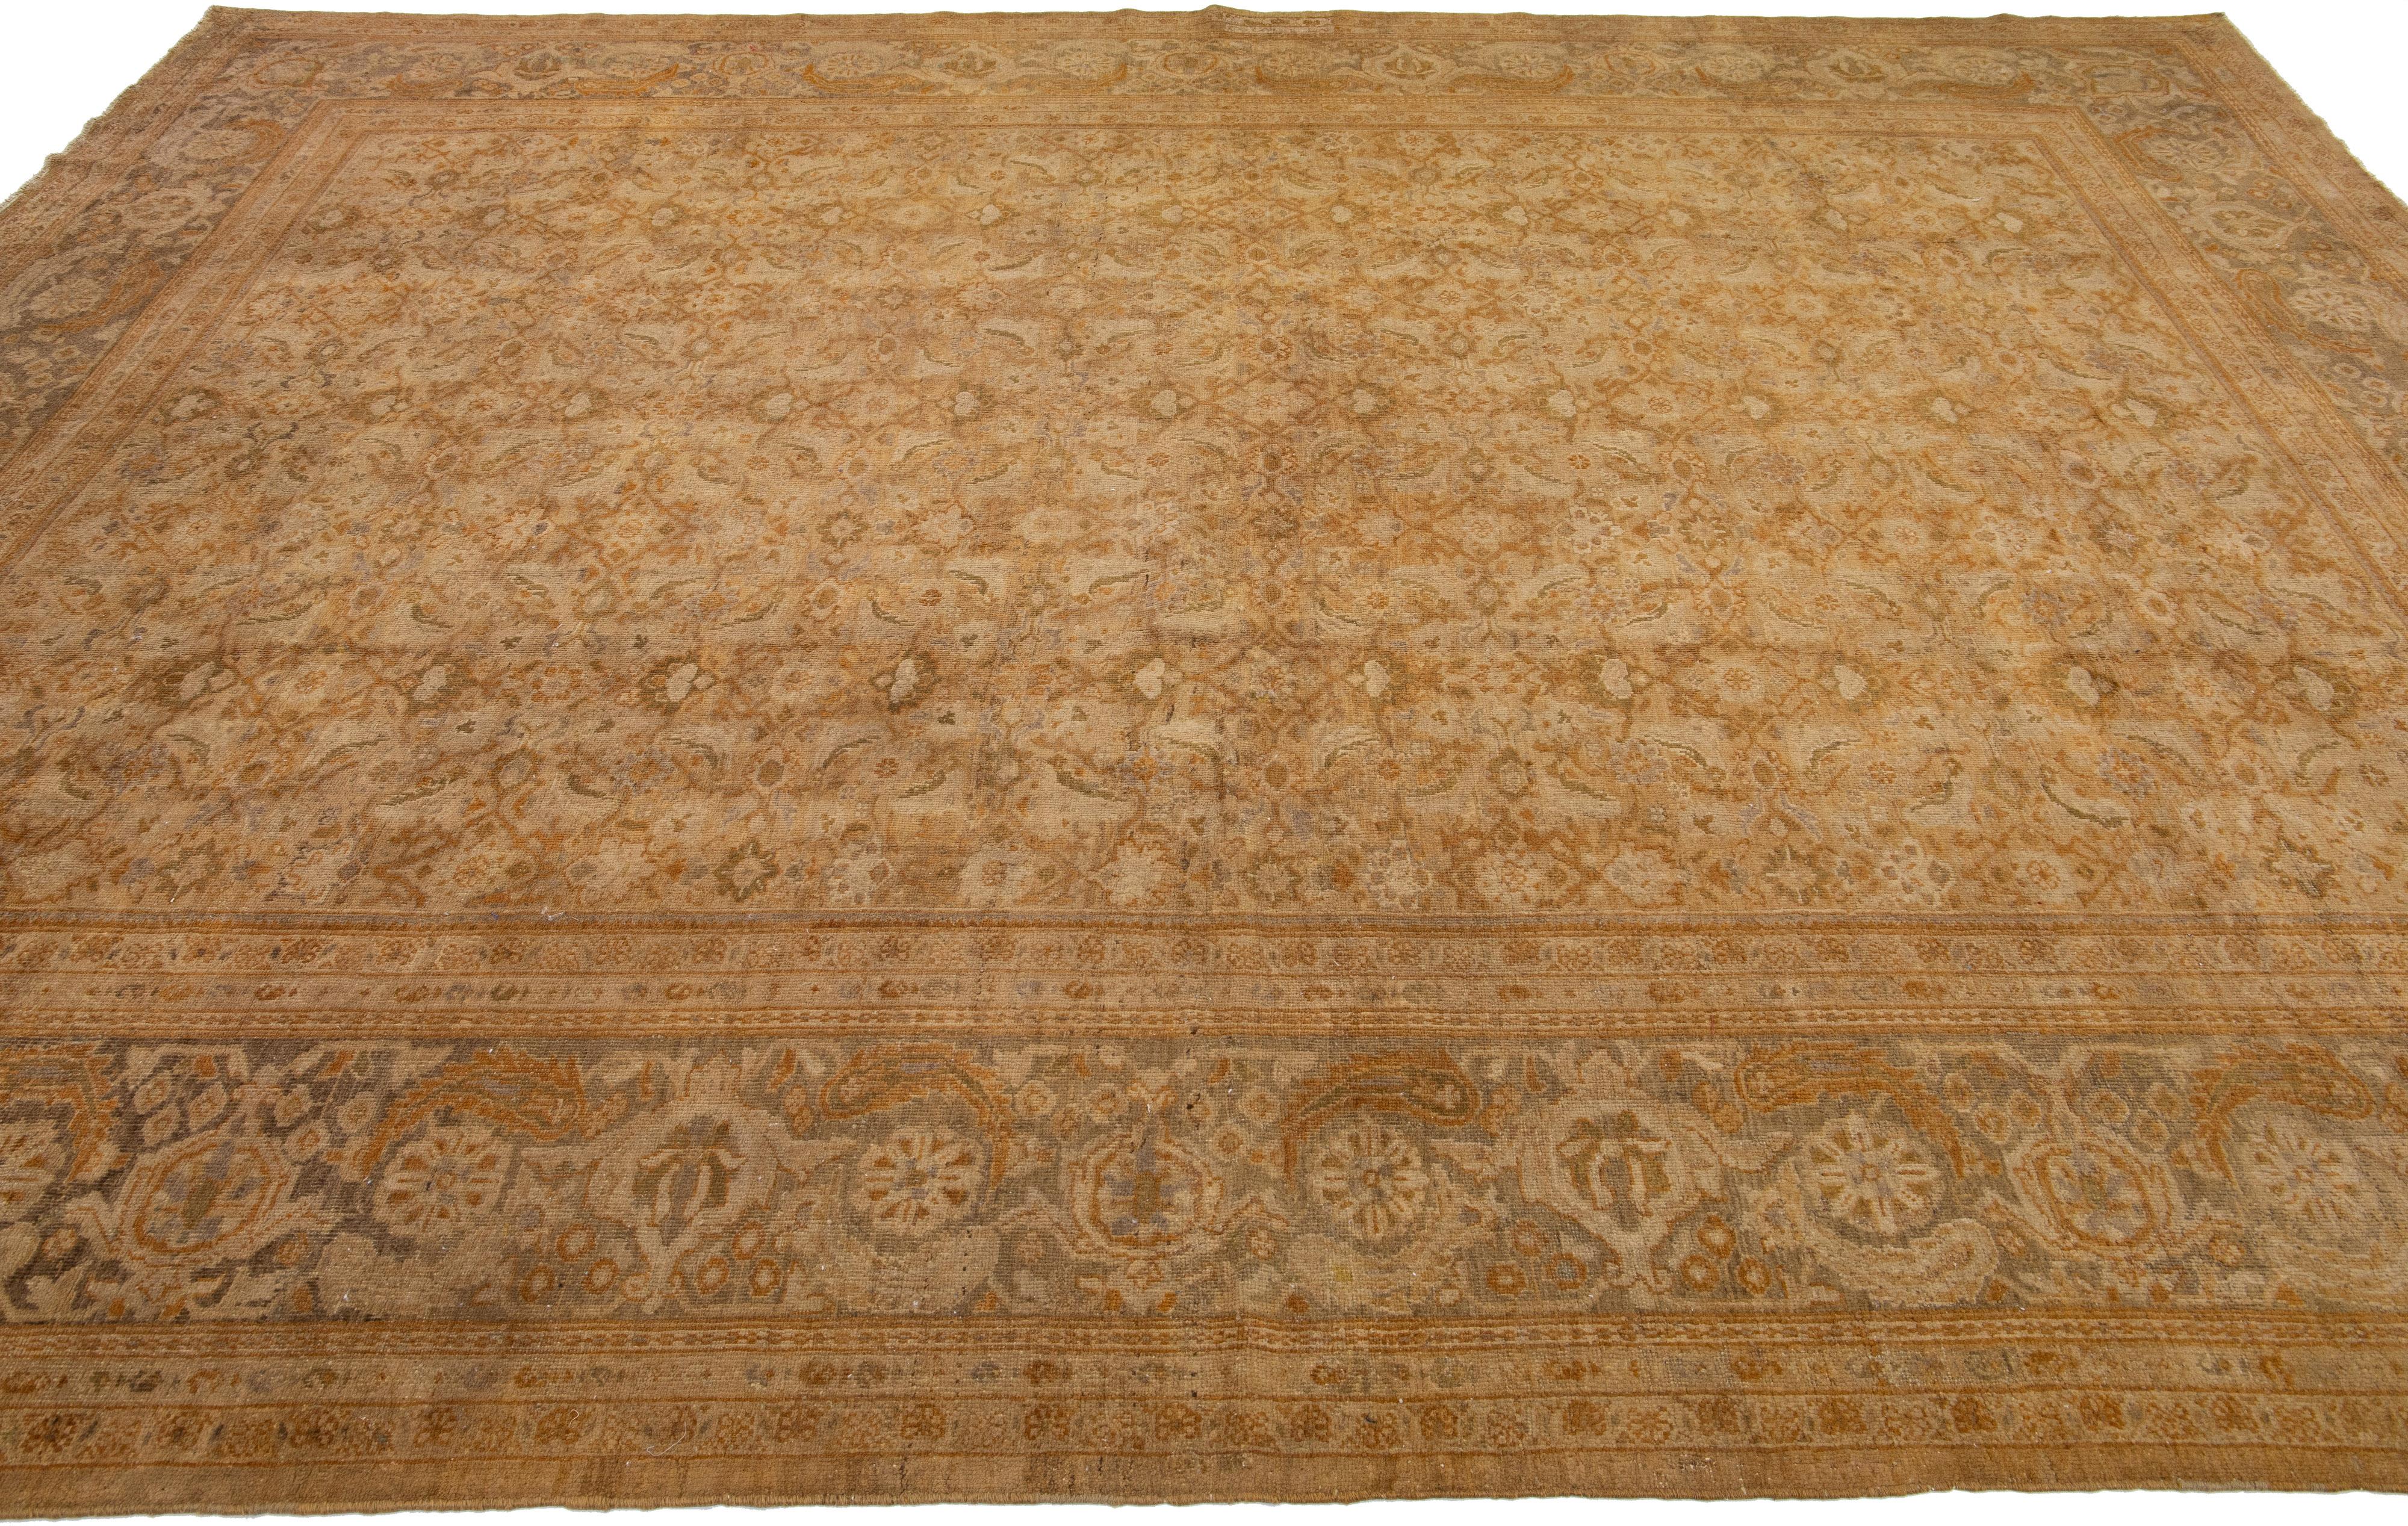 Antique Sultanabad Handmade Tan Wool Rug with Allover Floral Design In Good Condition For Sale In Norwalk, CT